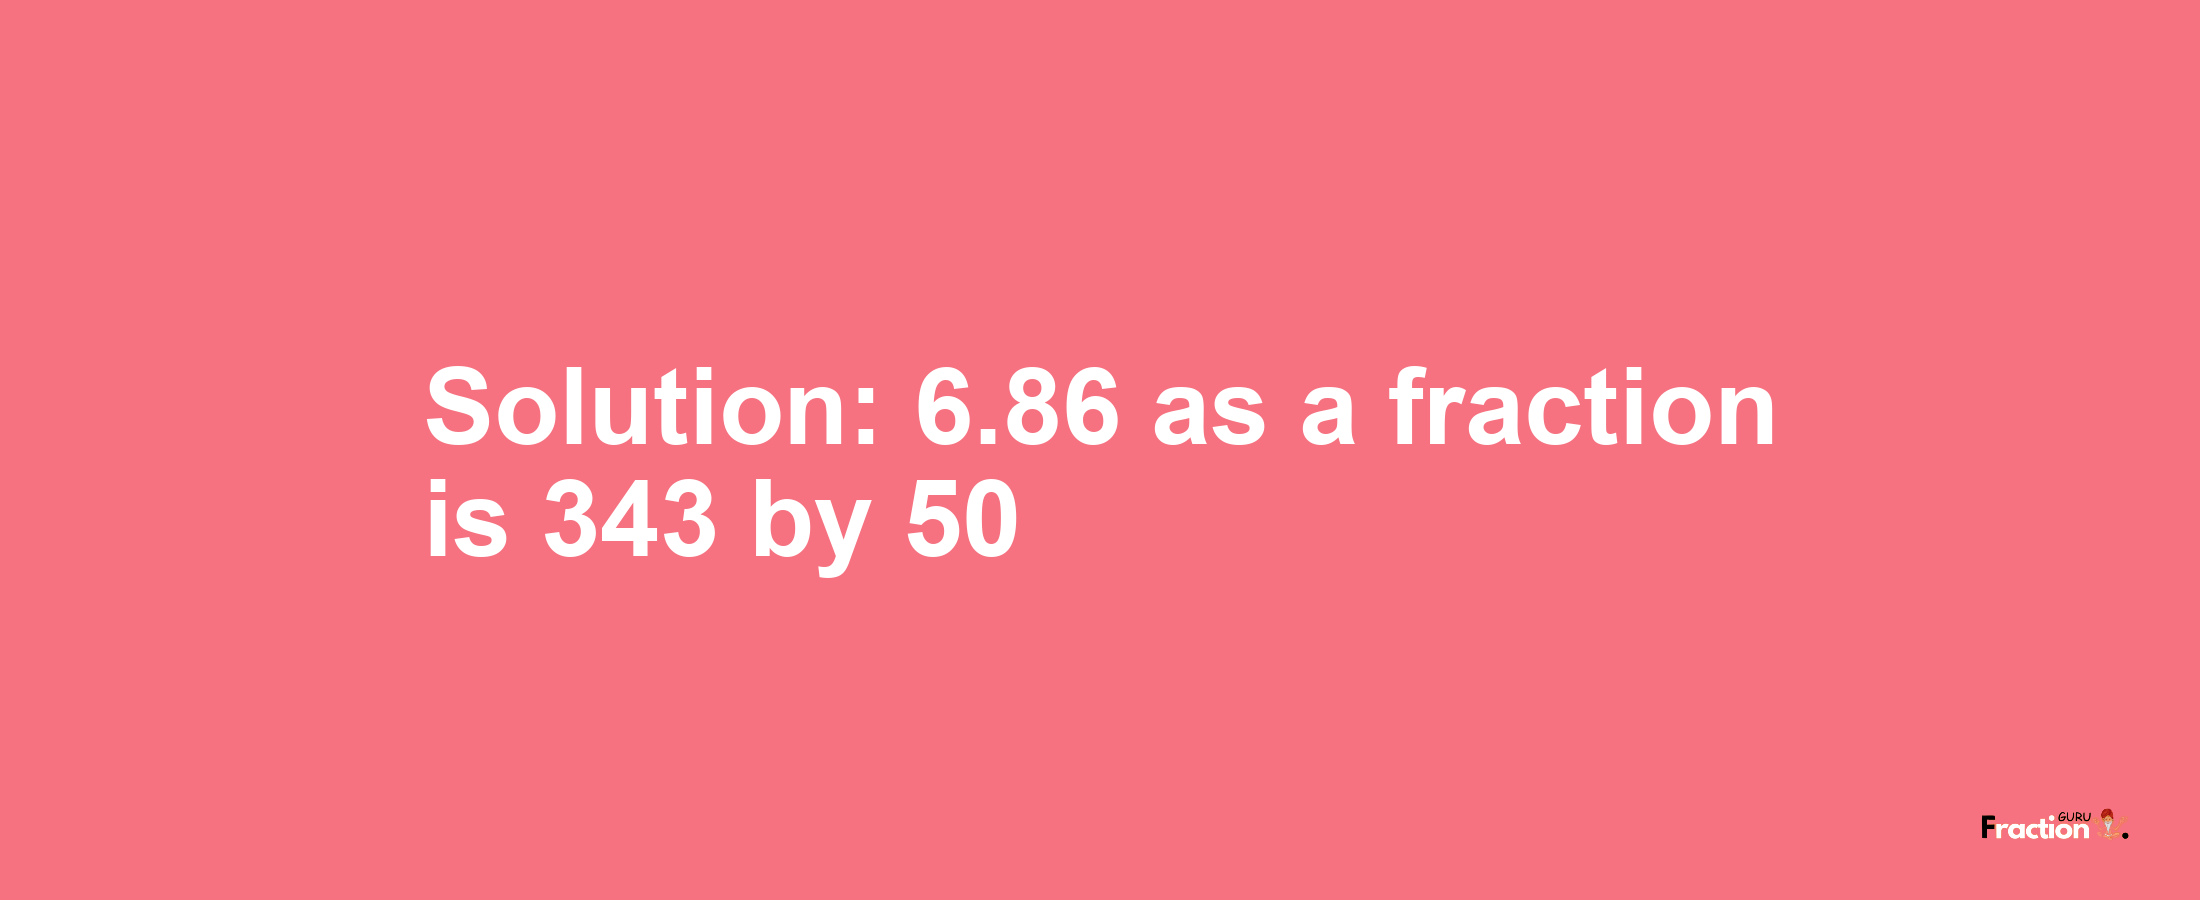 Solution:6.86 as a fraction is 343/50